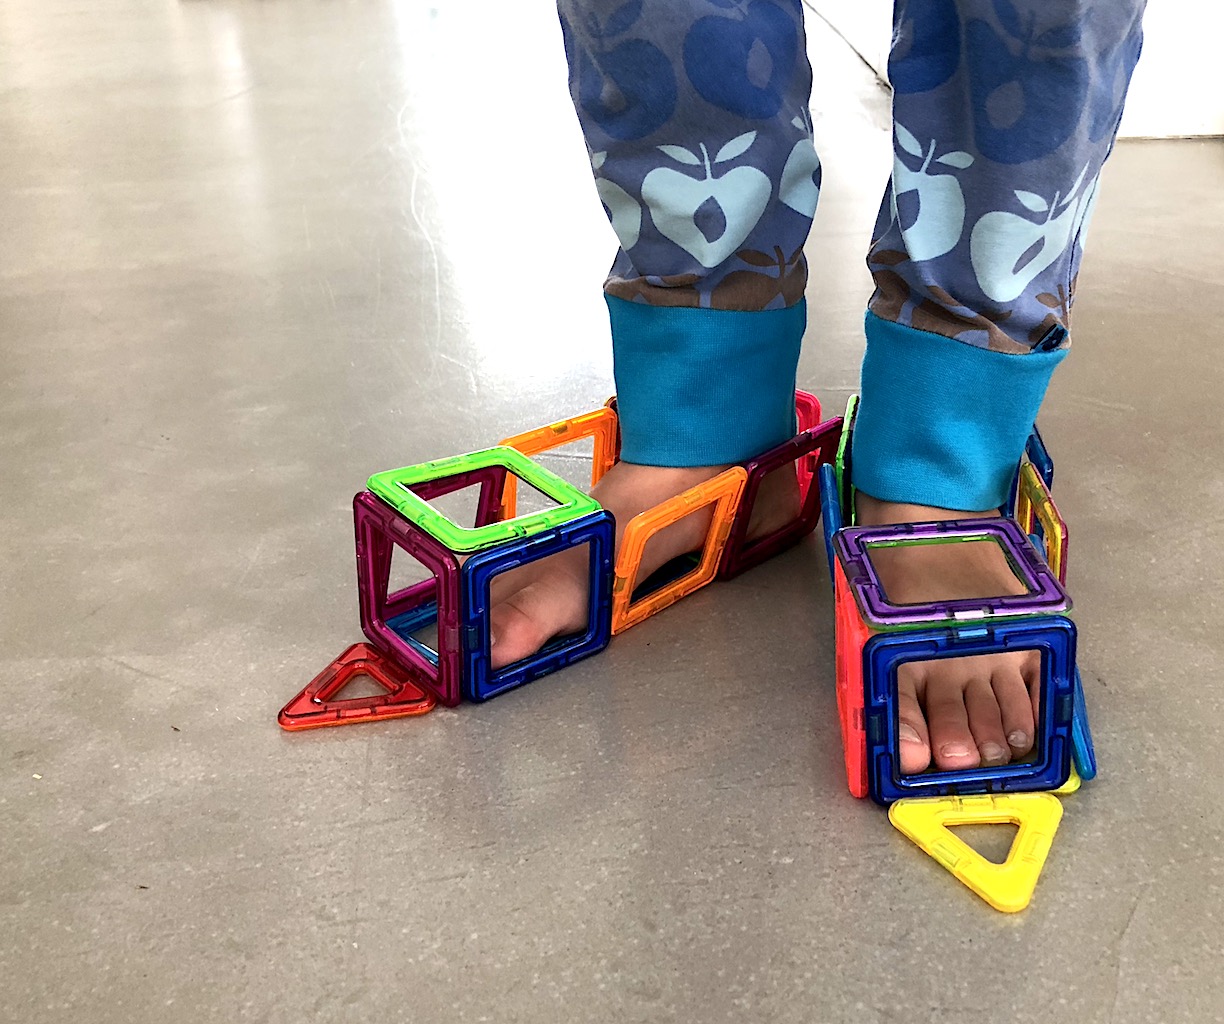 Magformers Shoes - Best STEM toy for children of all ages #Magformers #STEM #STEMToys #BestToy #AwardWinning